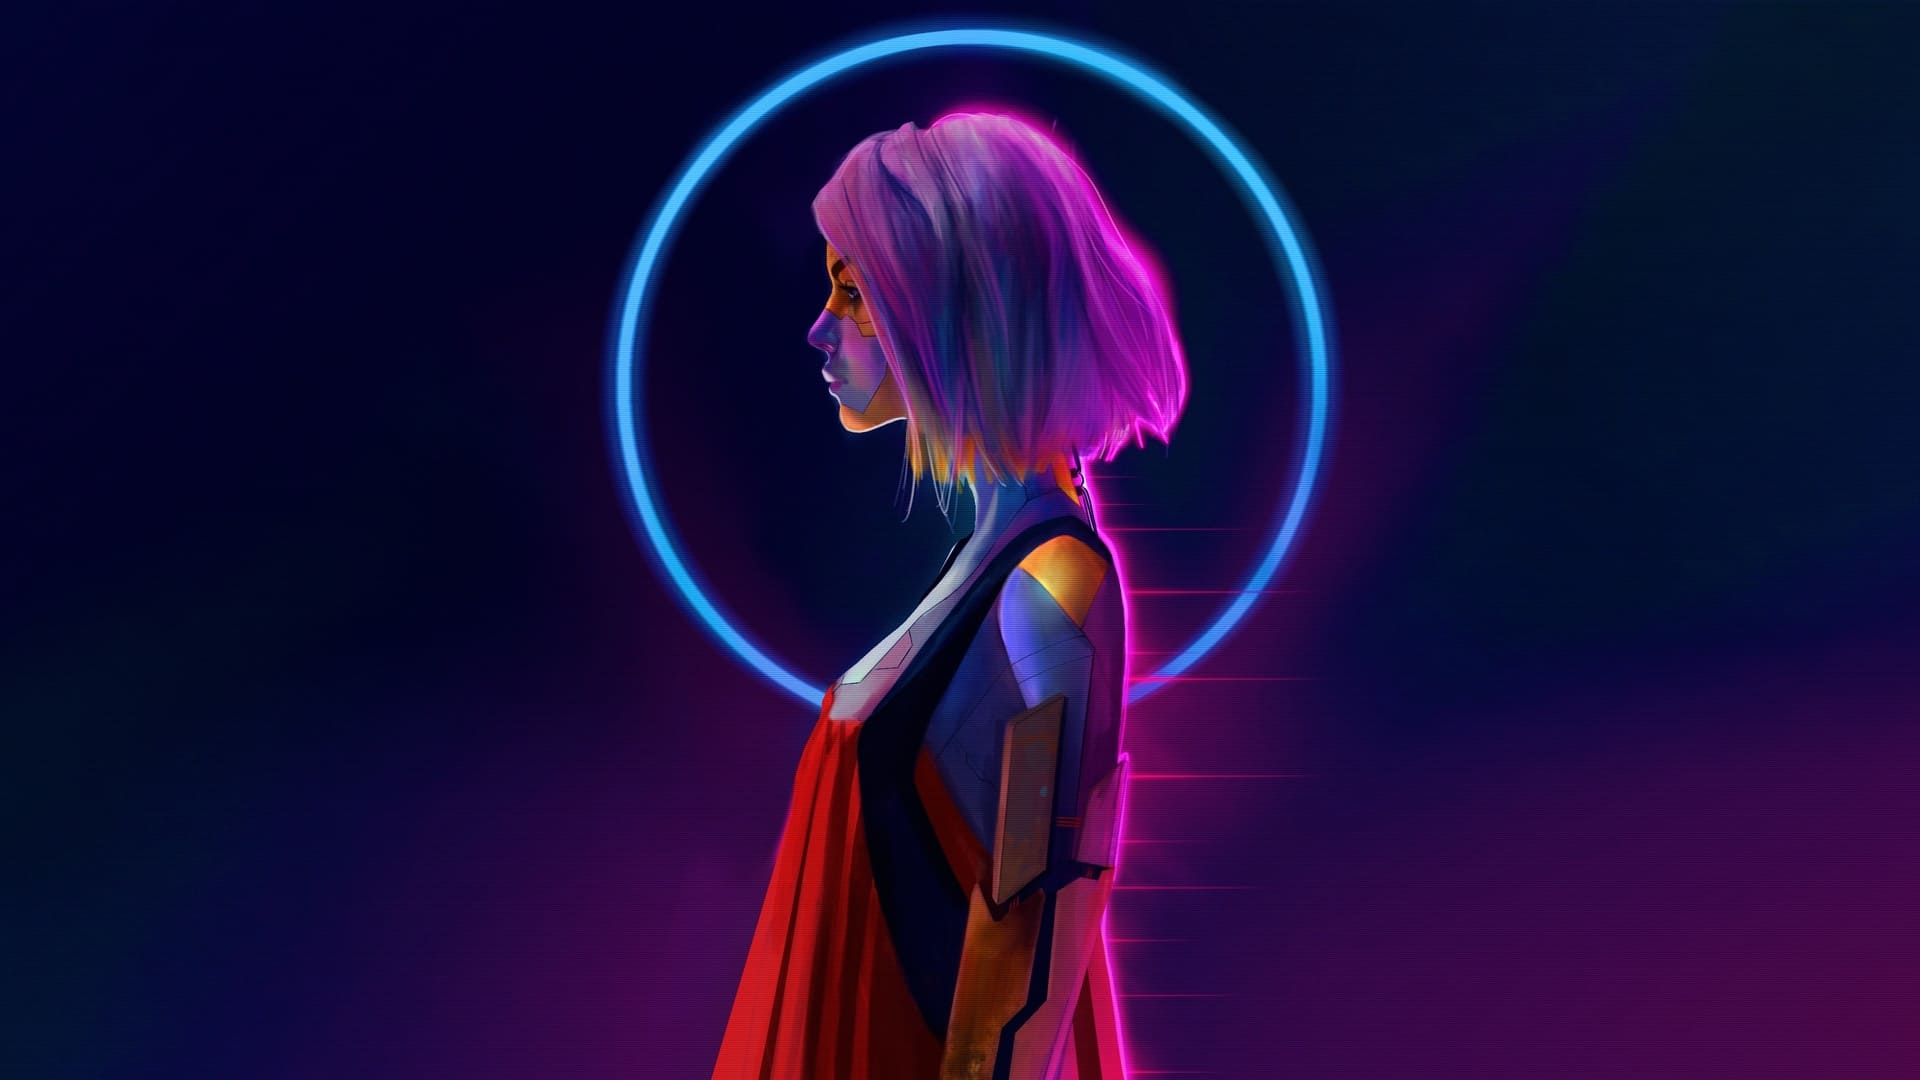 1920x1080 Cyberpunk girl with pink hair and a neon circle behind her - Windows 10